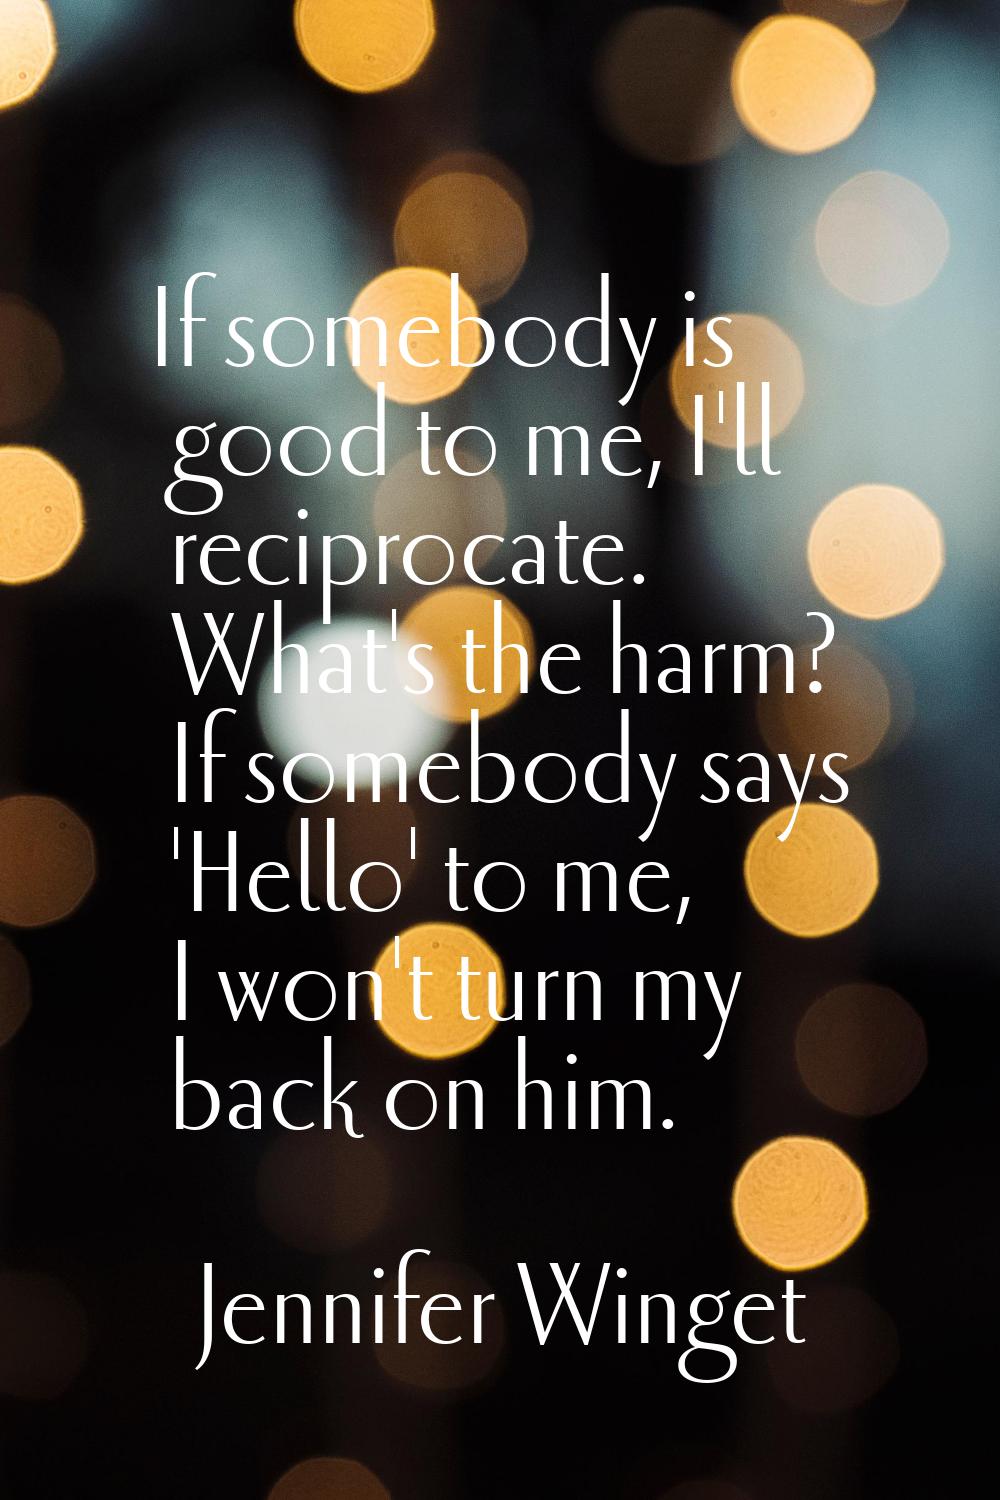 If somebody is good to me, I'll reciprocate. What's the harm? If somebody says 'Hello' to me, I won